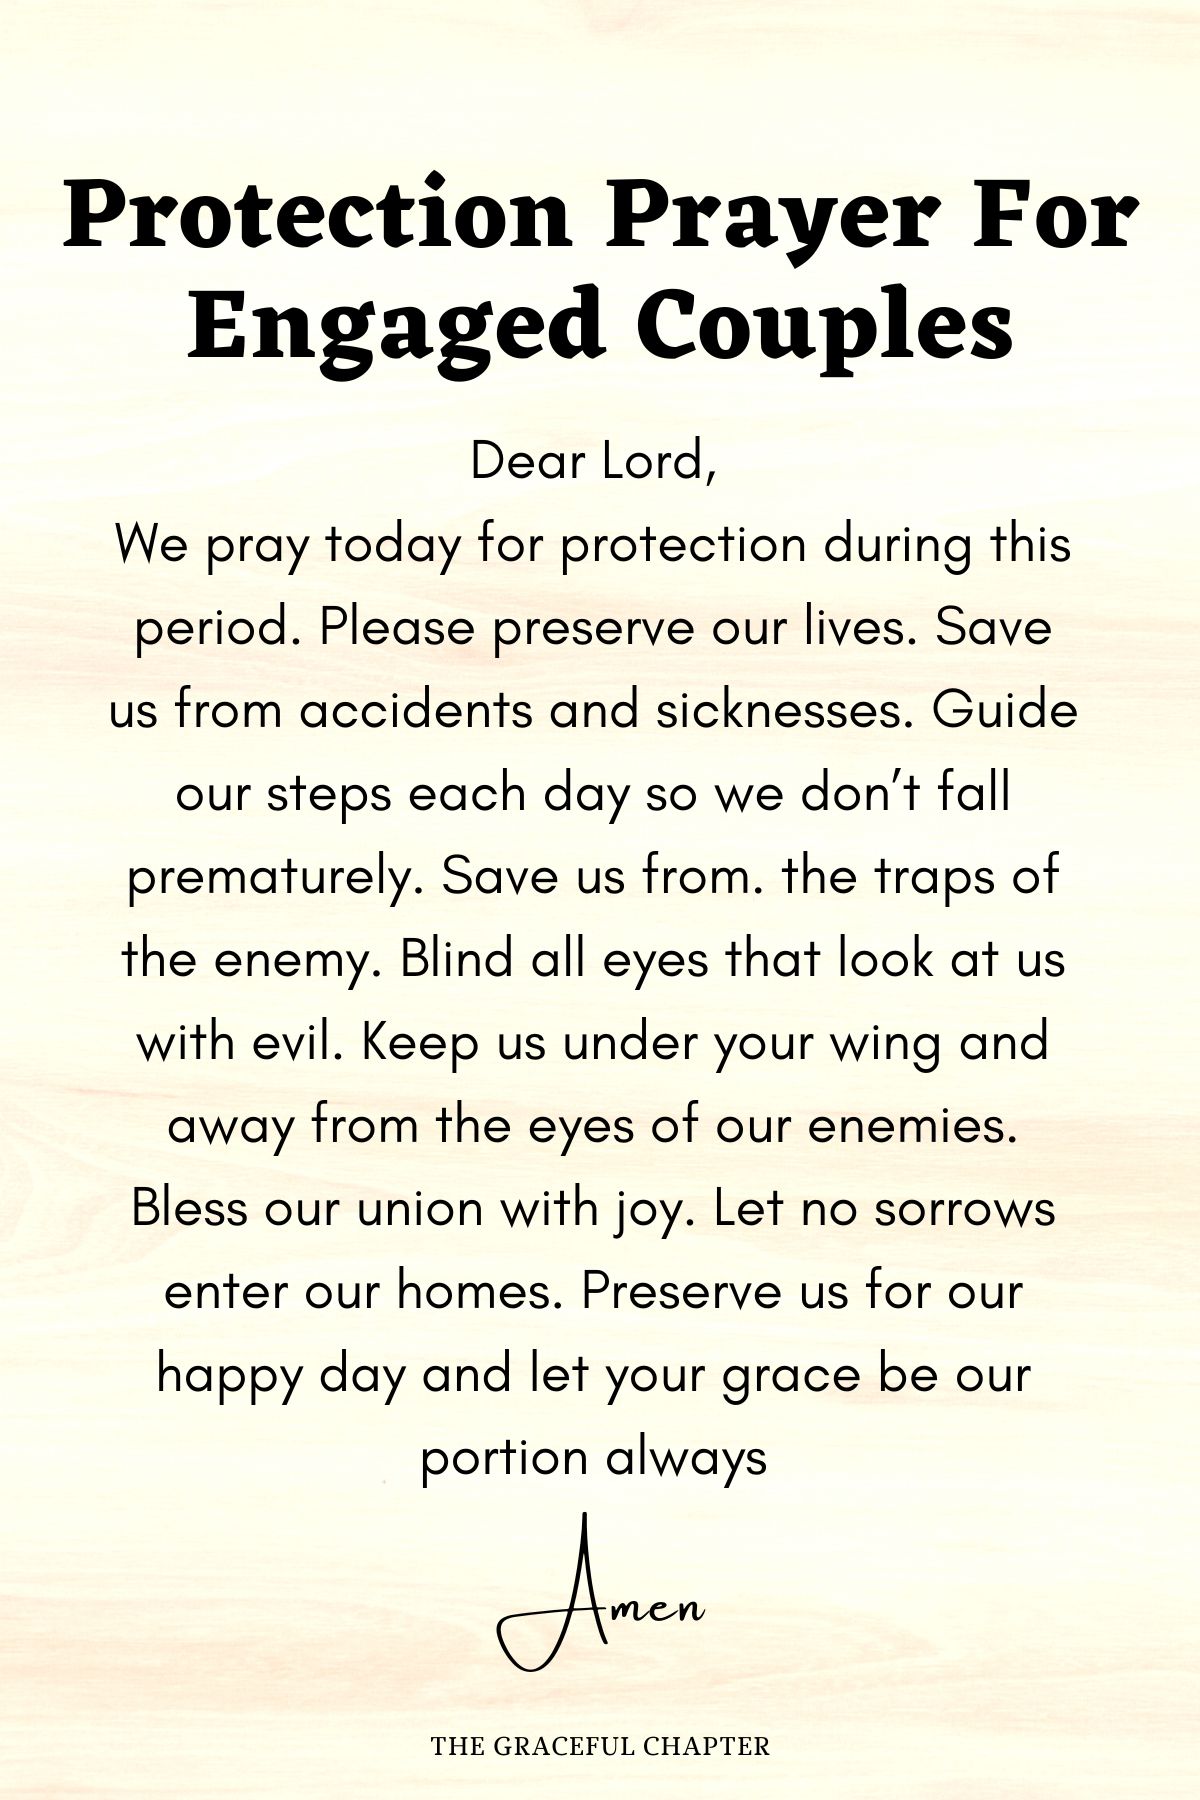  Protection prayer for engaged couples